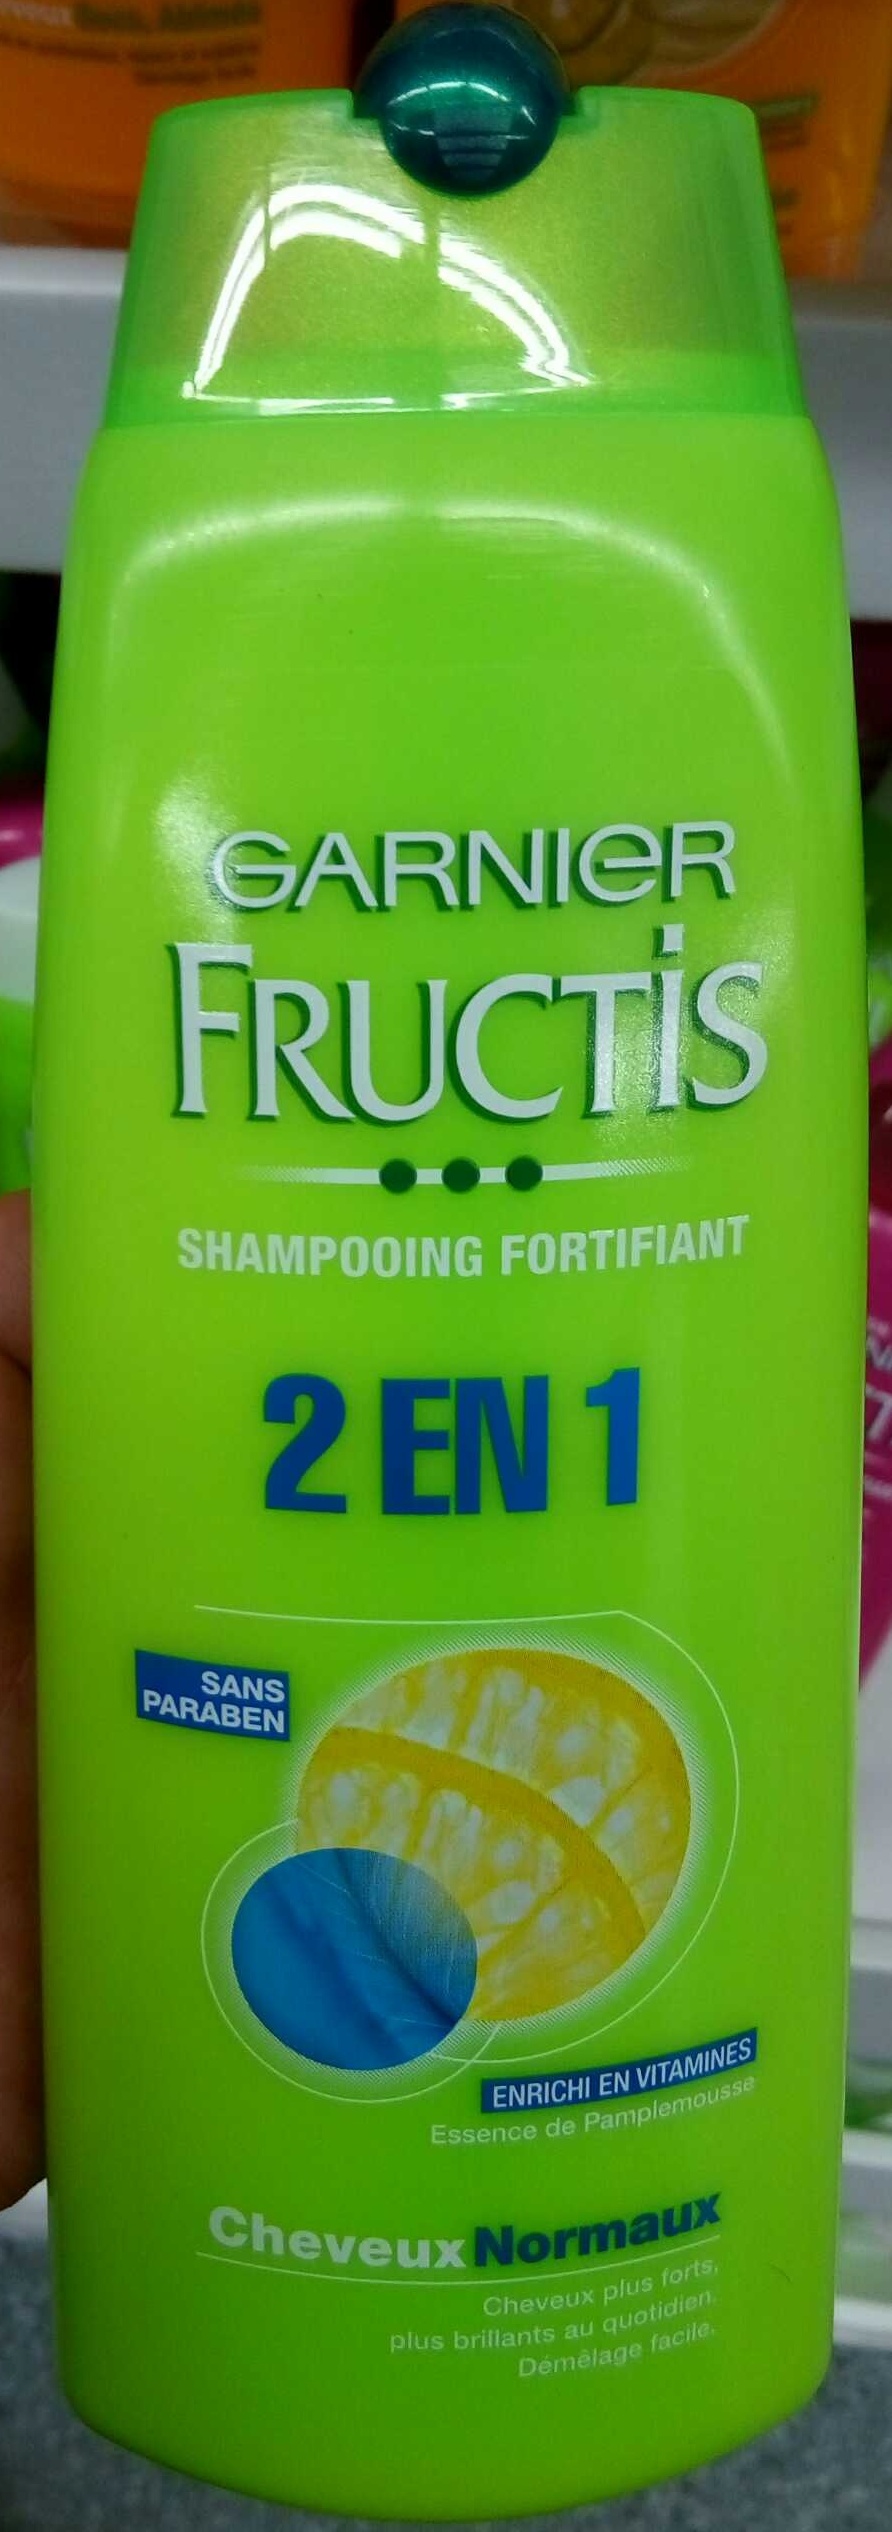 Fructis Shampooing fortifiant 2 en 1 - Product - fr